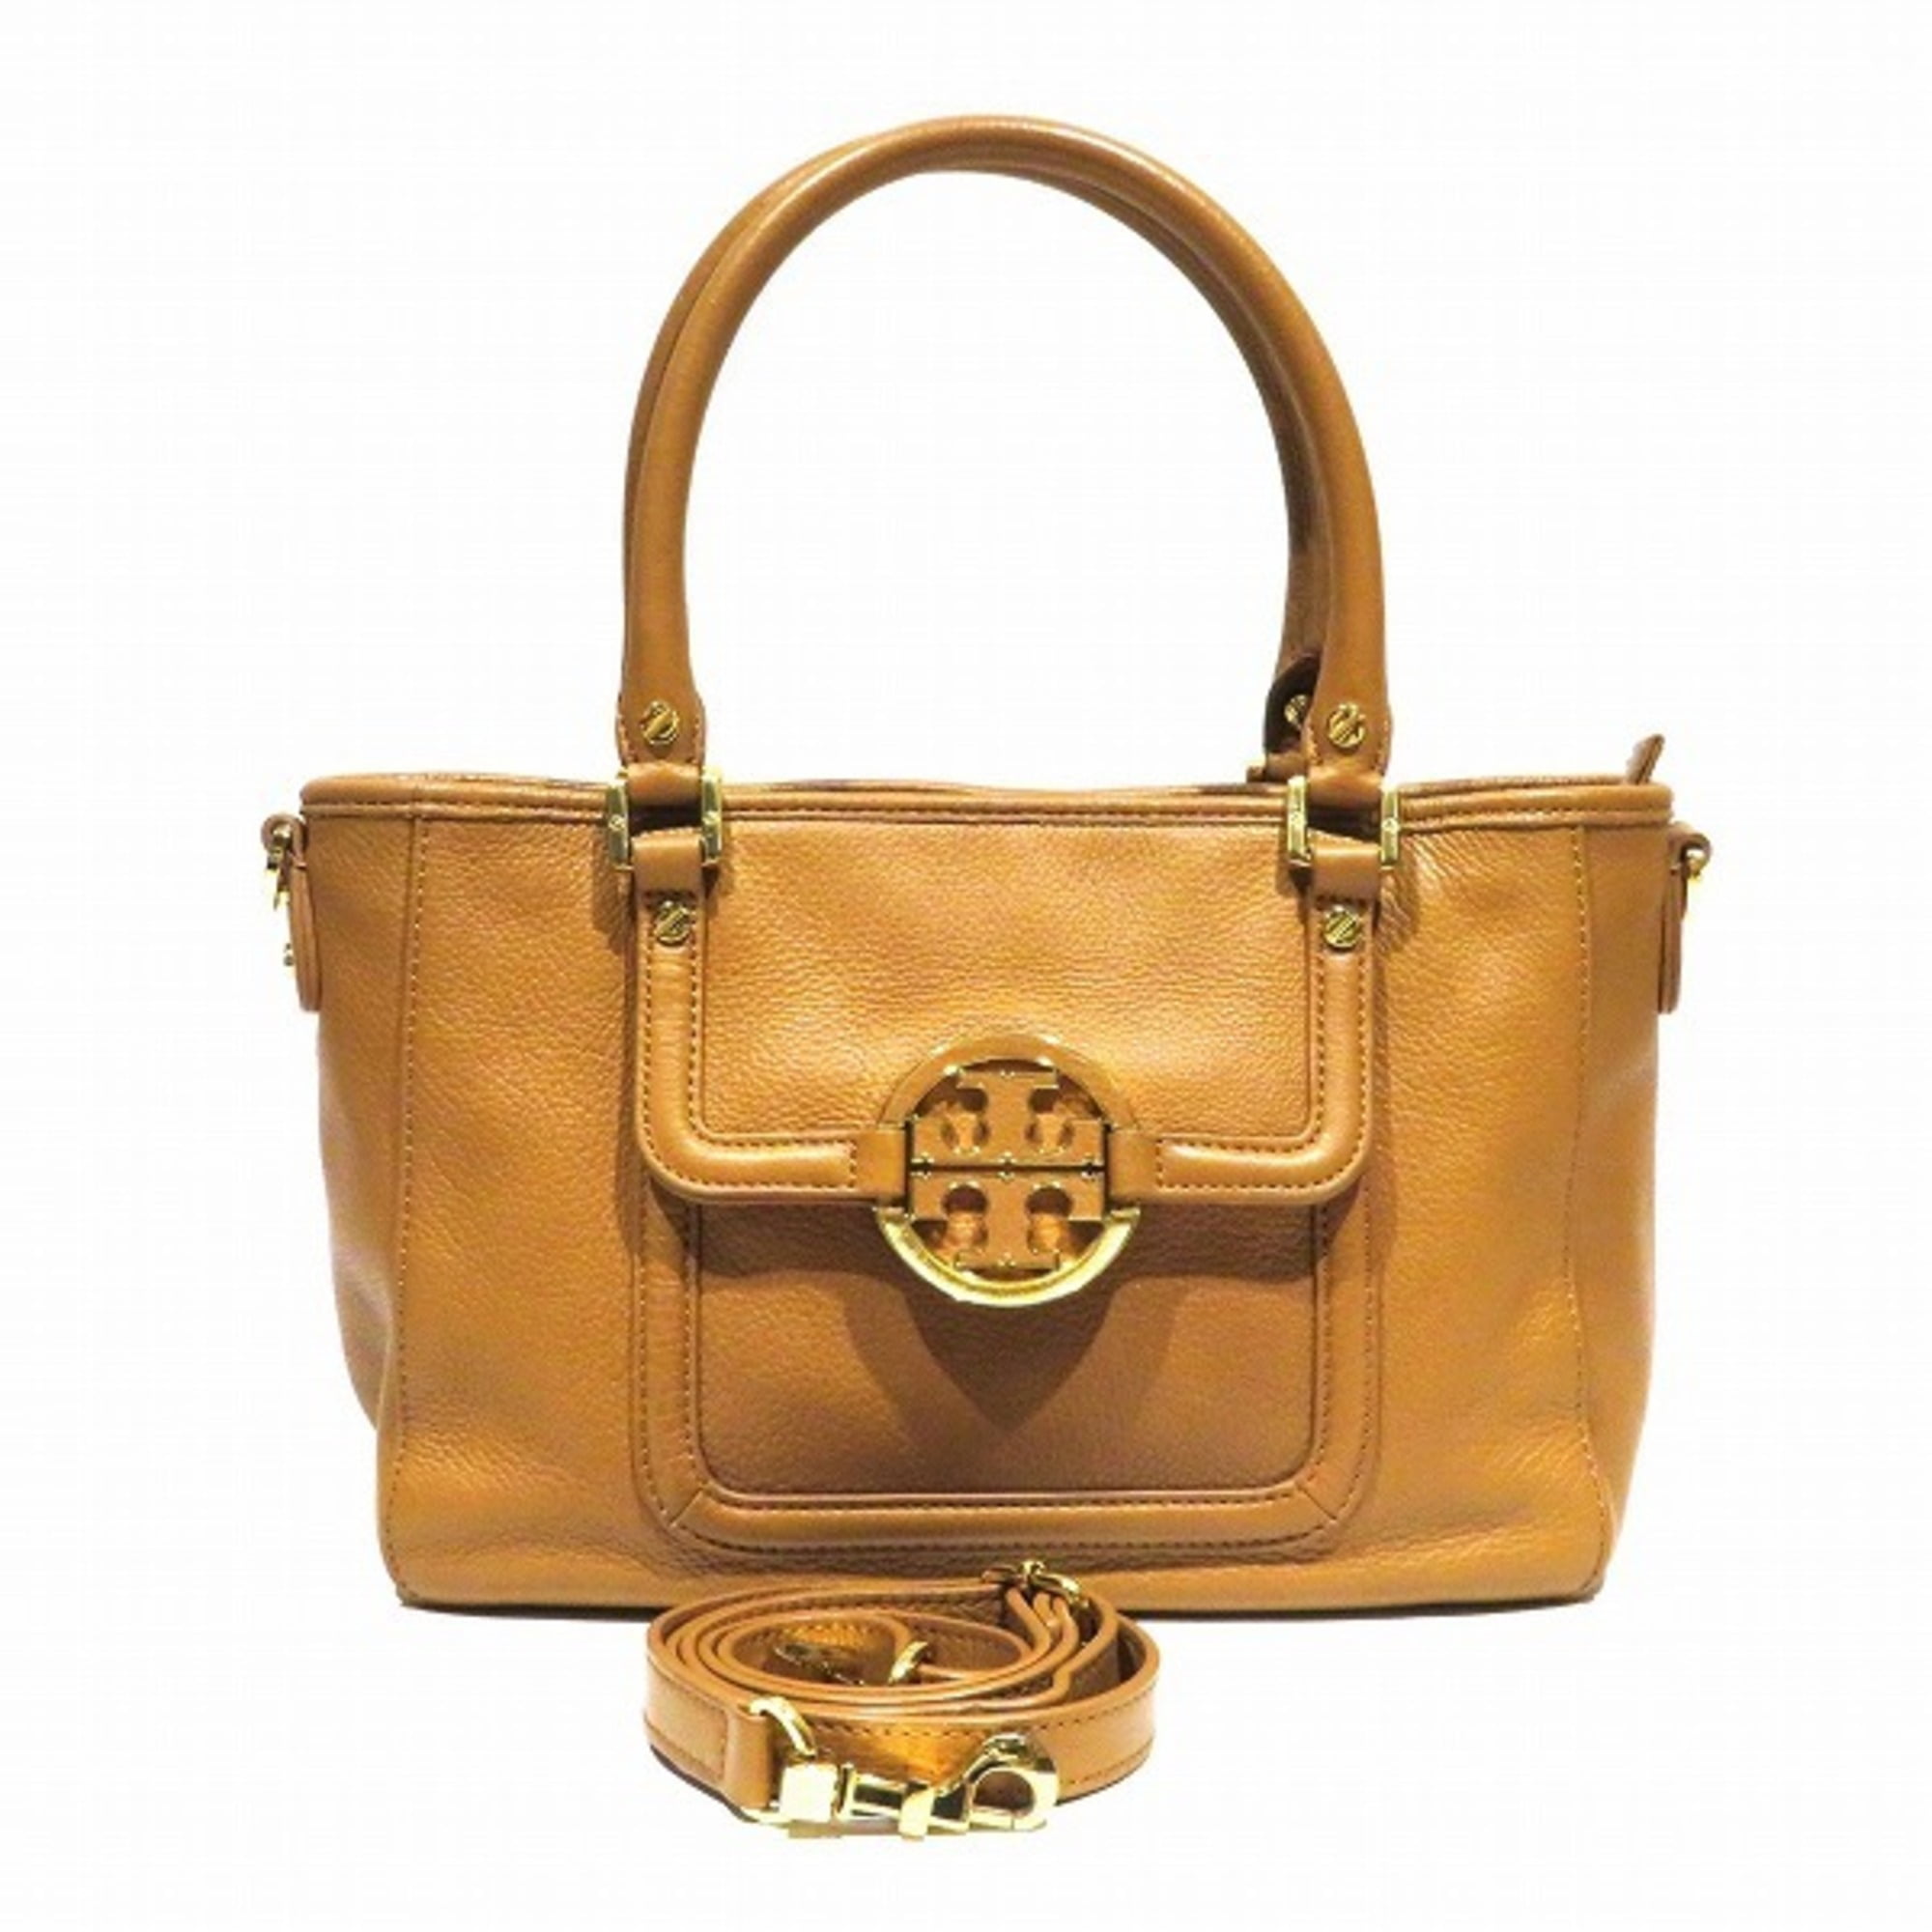 Buy [Used] TORY BURCH Amanda 2WAY shoulder bag Boston bag leather white  gold metal fittings from Japan - Buy authentic Plus exclusive items from  Japan